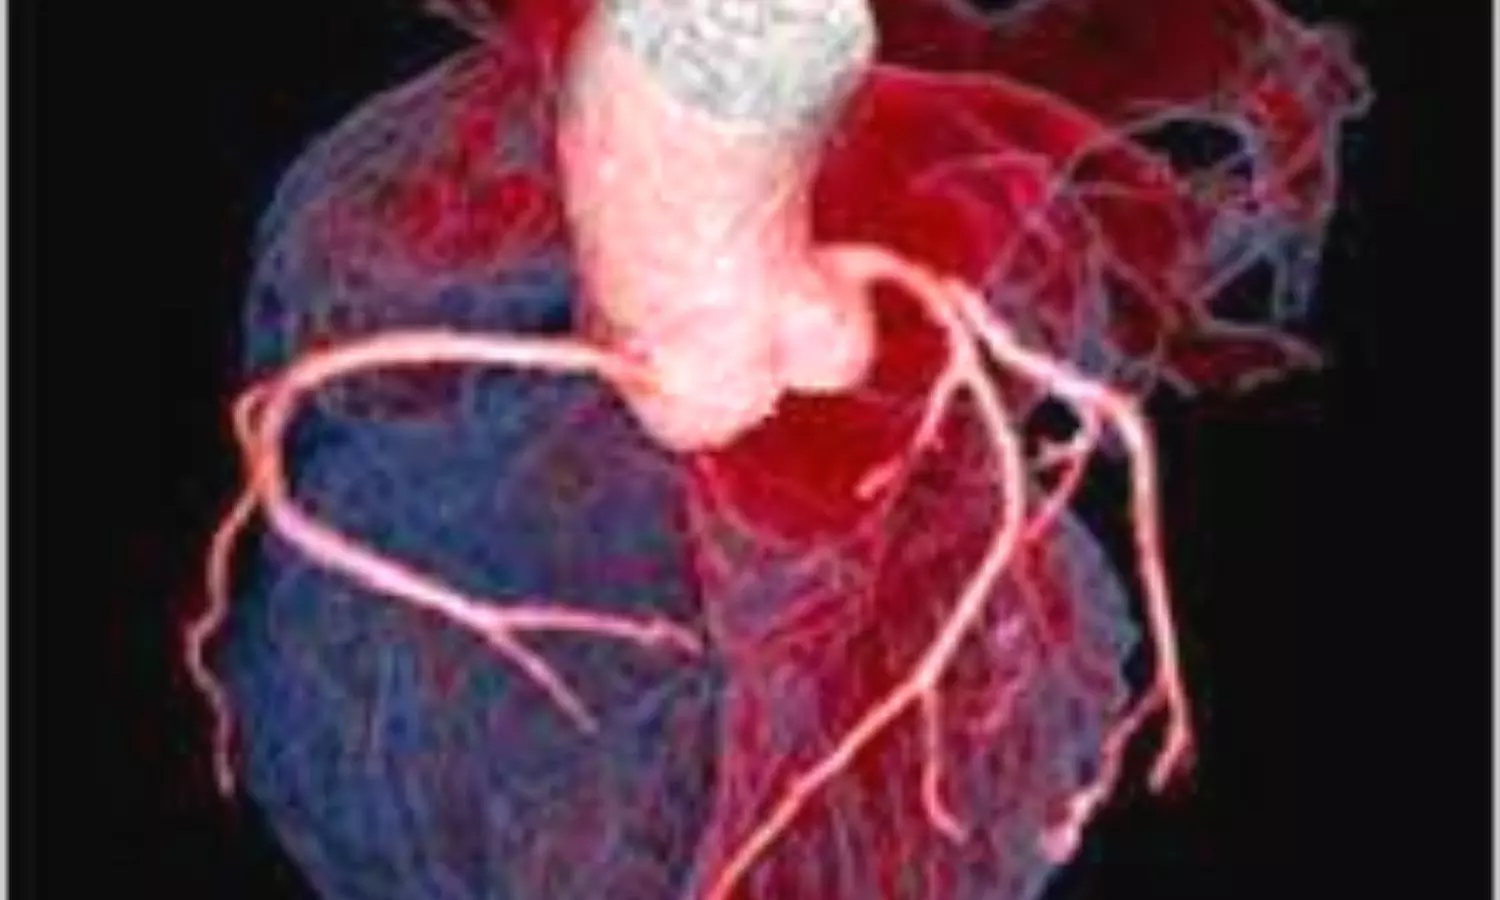 Noninvasive CT scan before coronary angiography improves satisfaction, outcomes in patients with prior CABG: BYPASS-CTCA